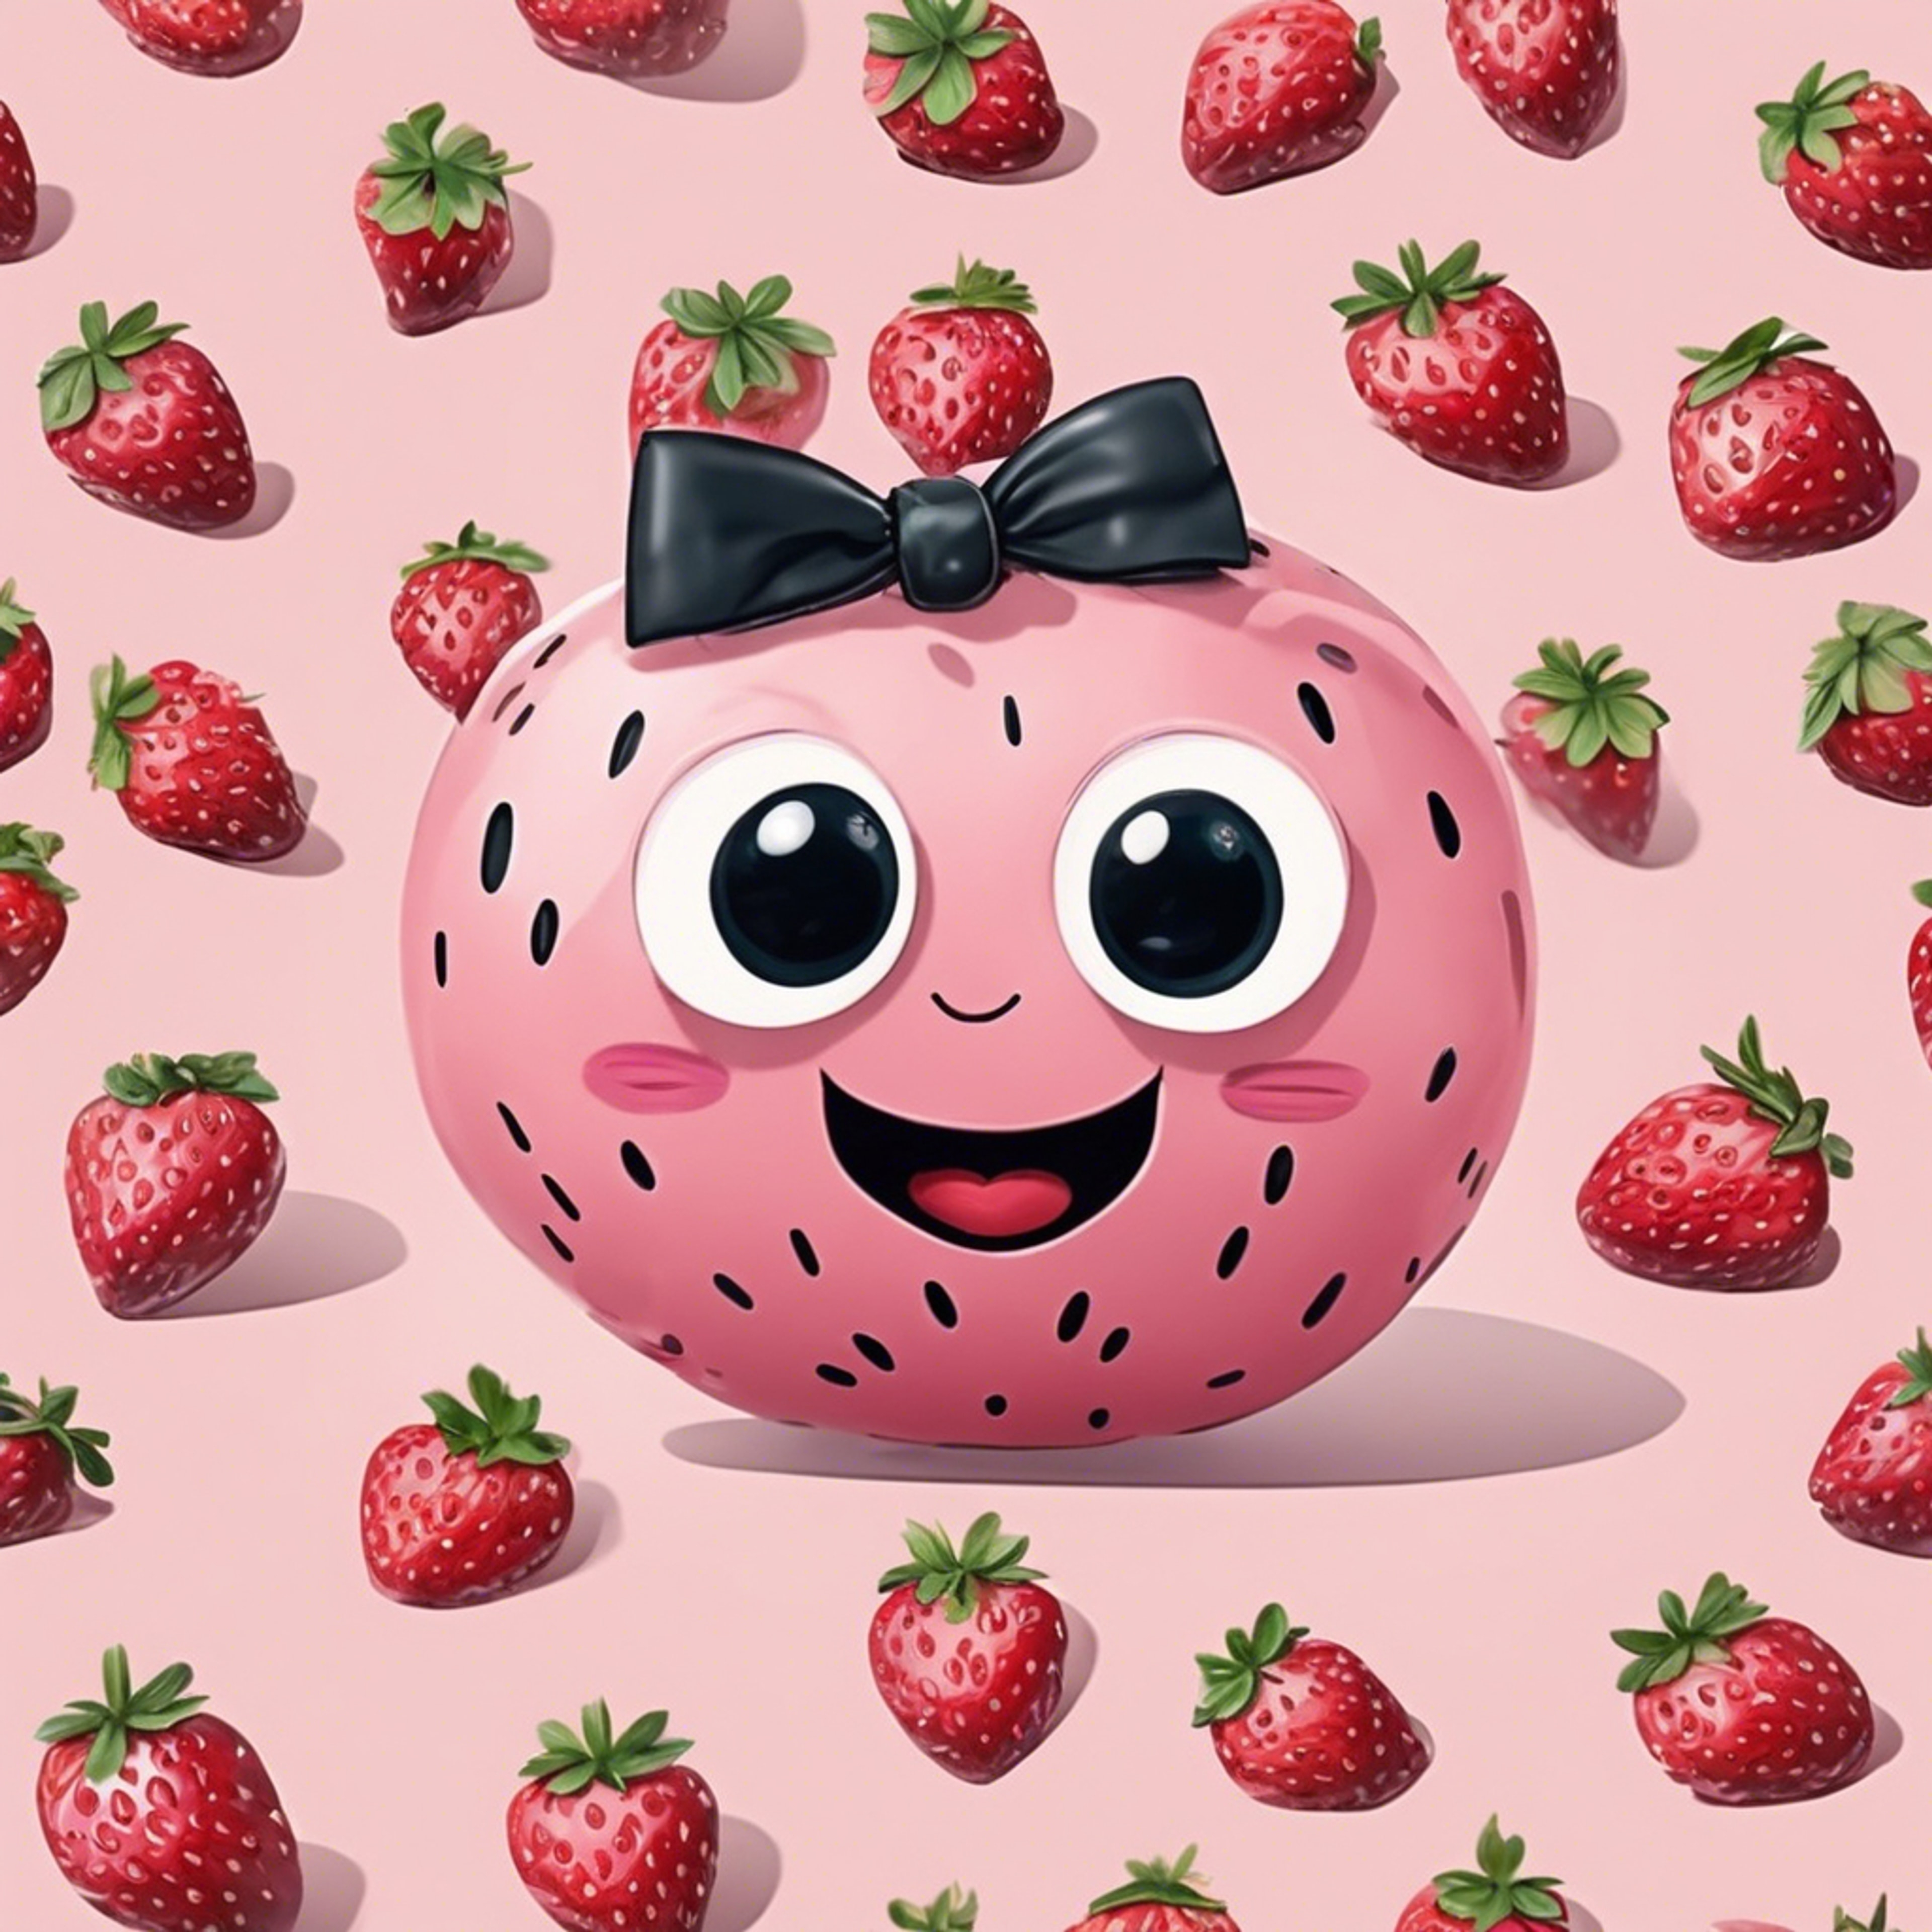 Cute, smiling light pink kawaii strawberries with big eyes and little bow ties. 墙纸[24a5e2efca874b08b7f4]